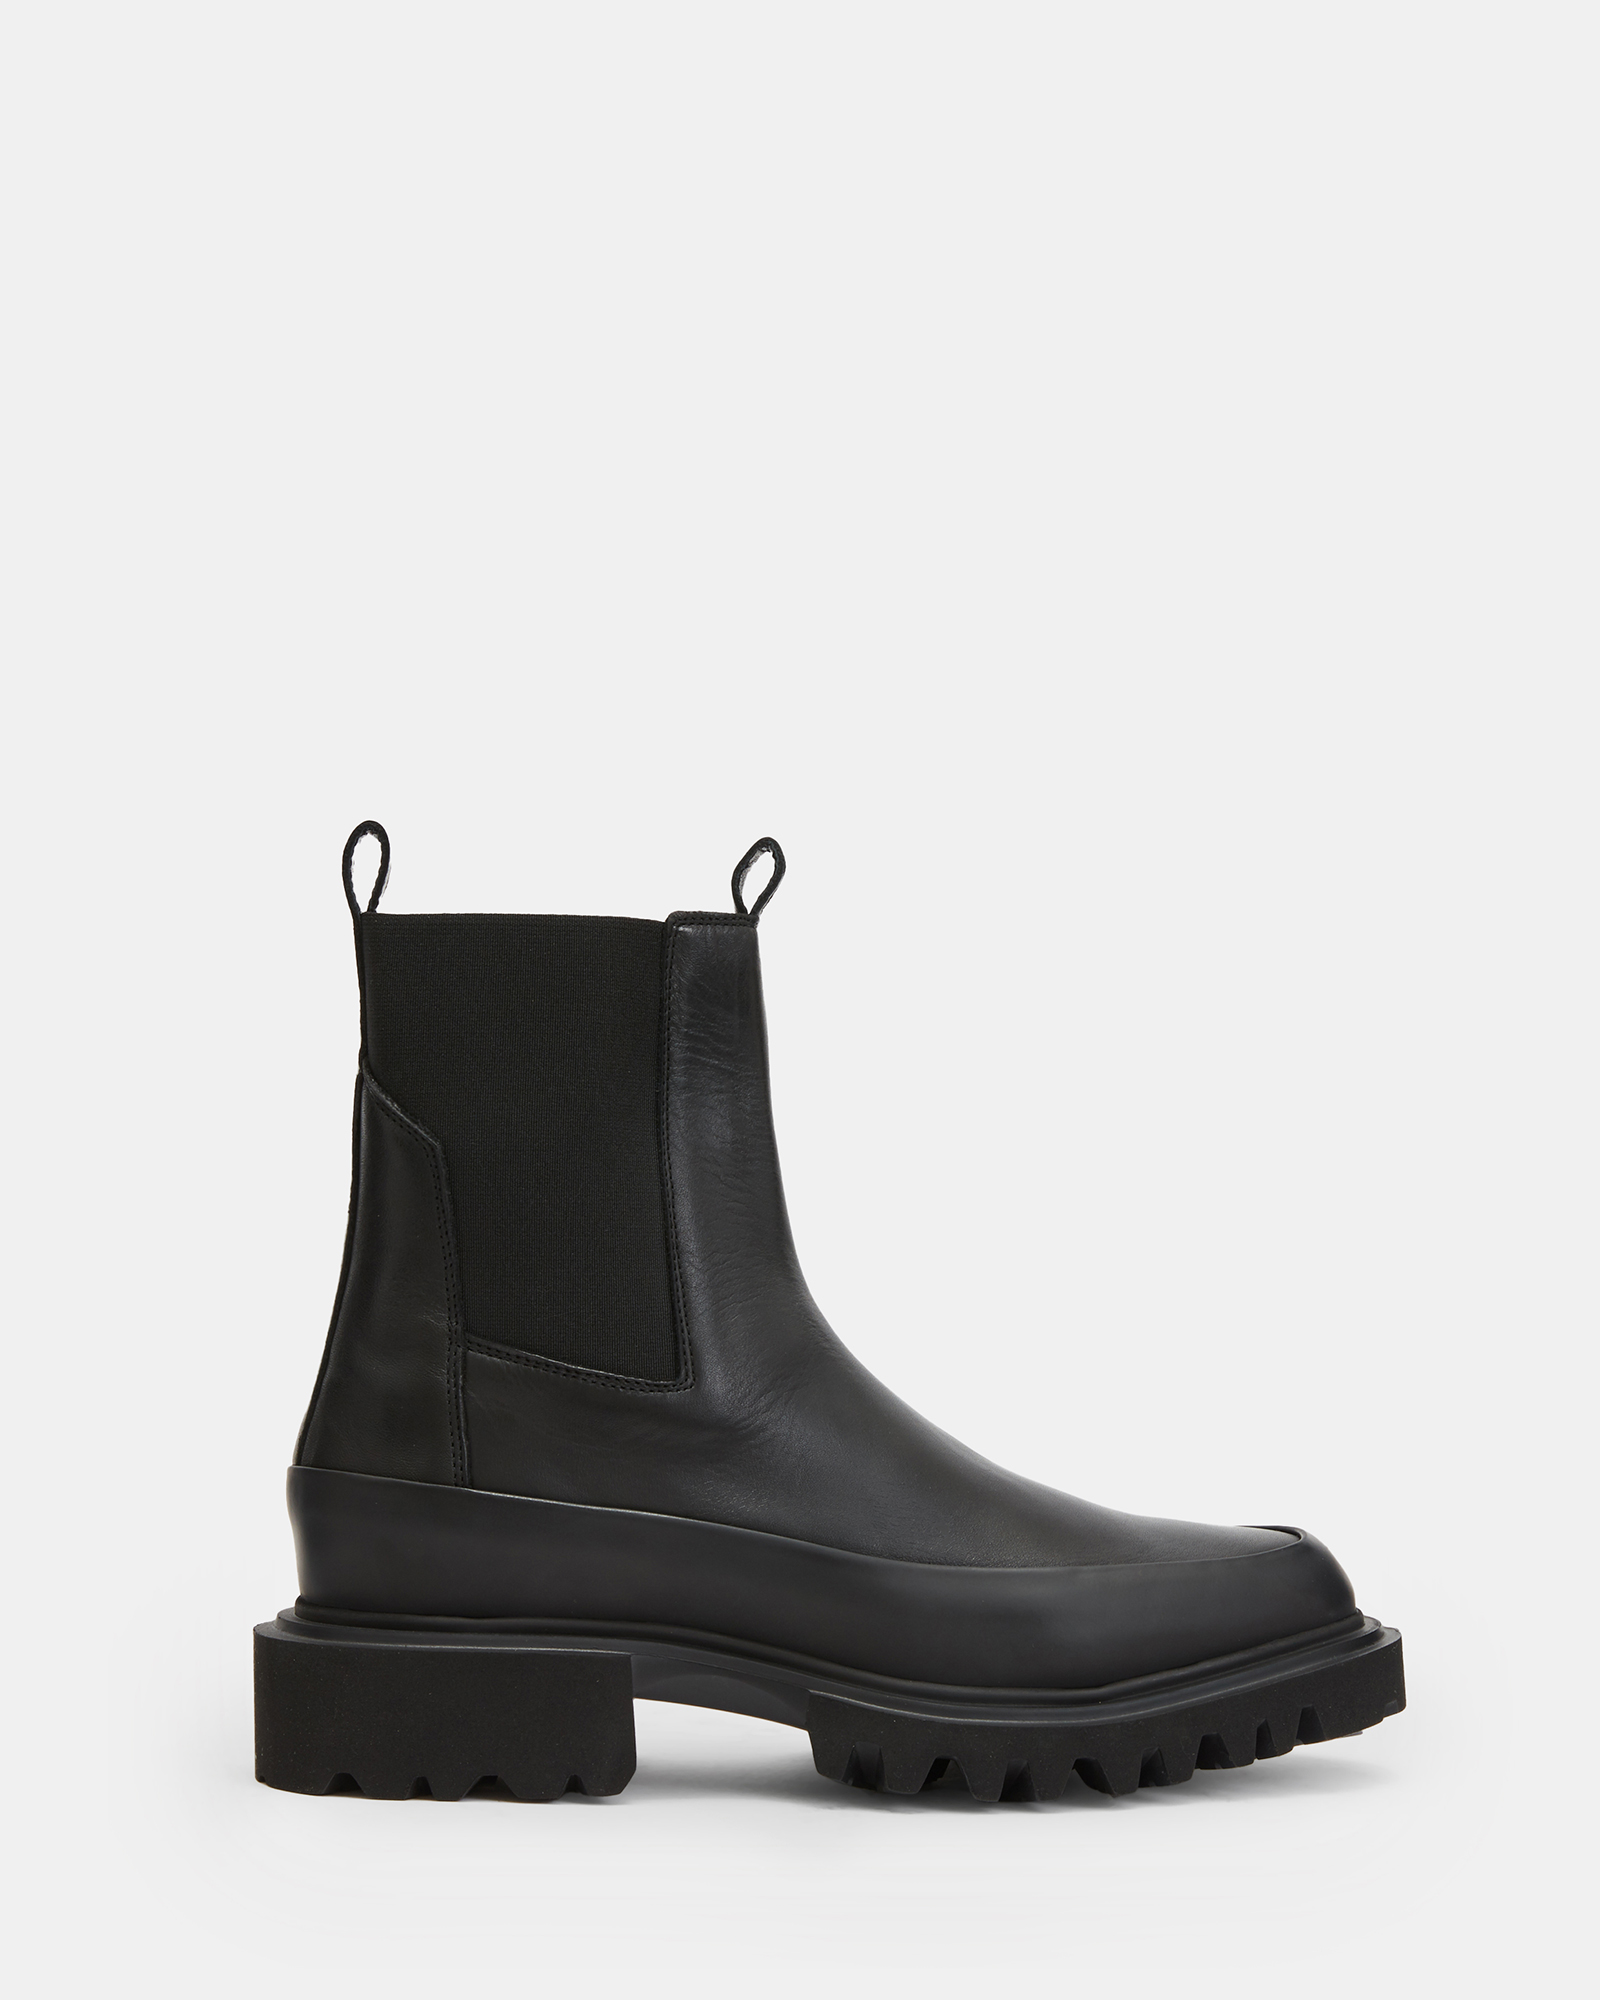 AllSaints Harlee Chunky Sole Leather Boots,, Black